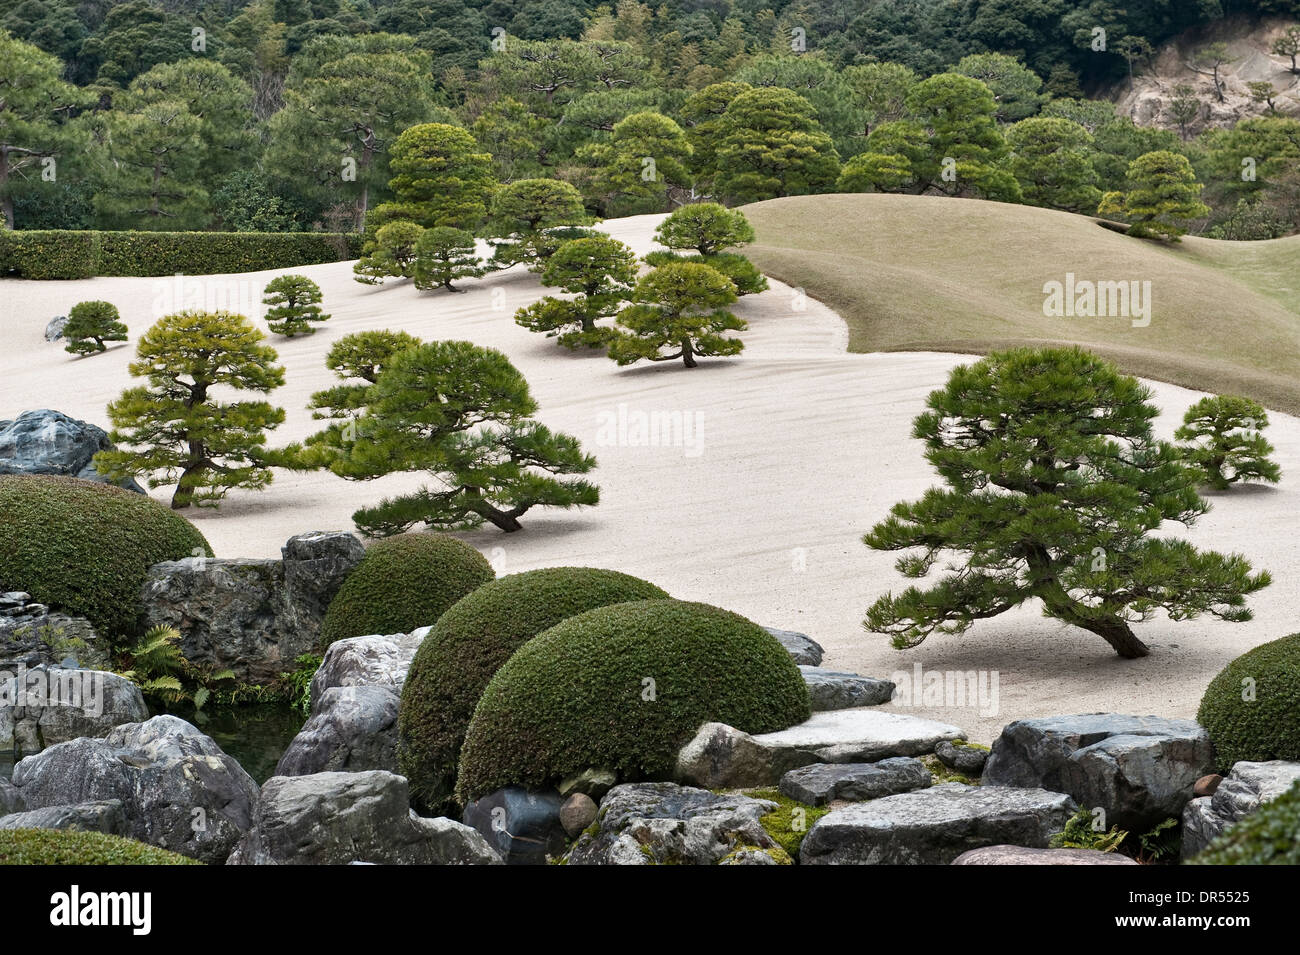 Miniature pine trees give a sense of scale to the gardens of the Adachi Museum of Art, a famous 20c garden by Adachi Zenko at Matsue, Japan Stock Photo